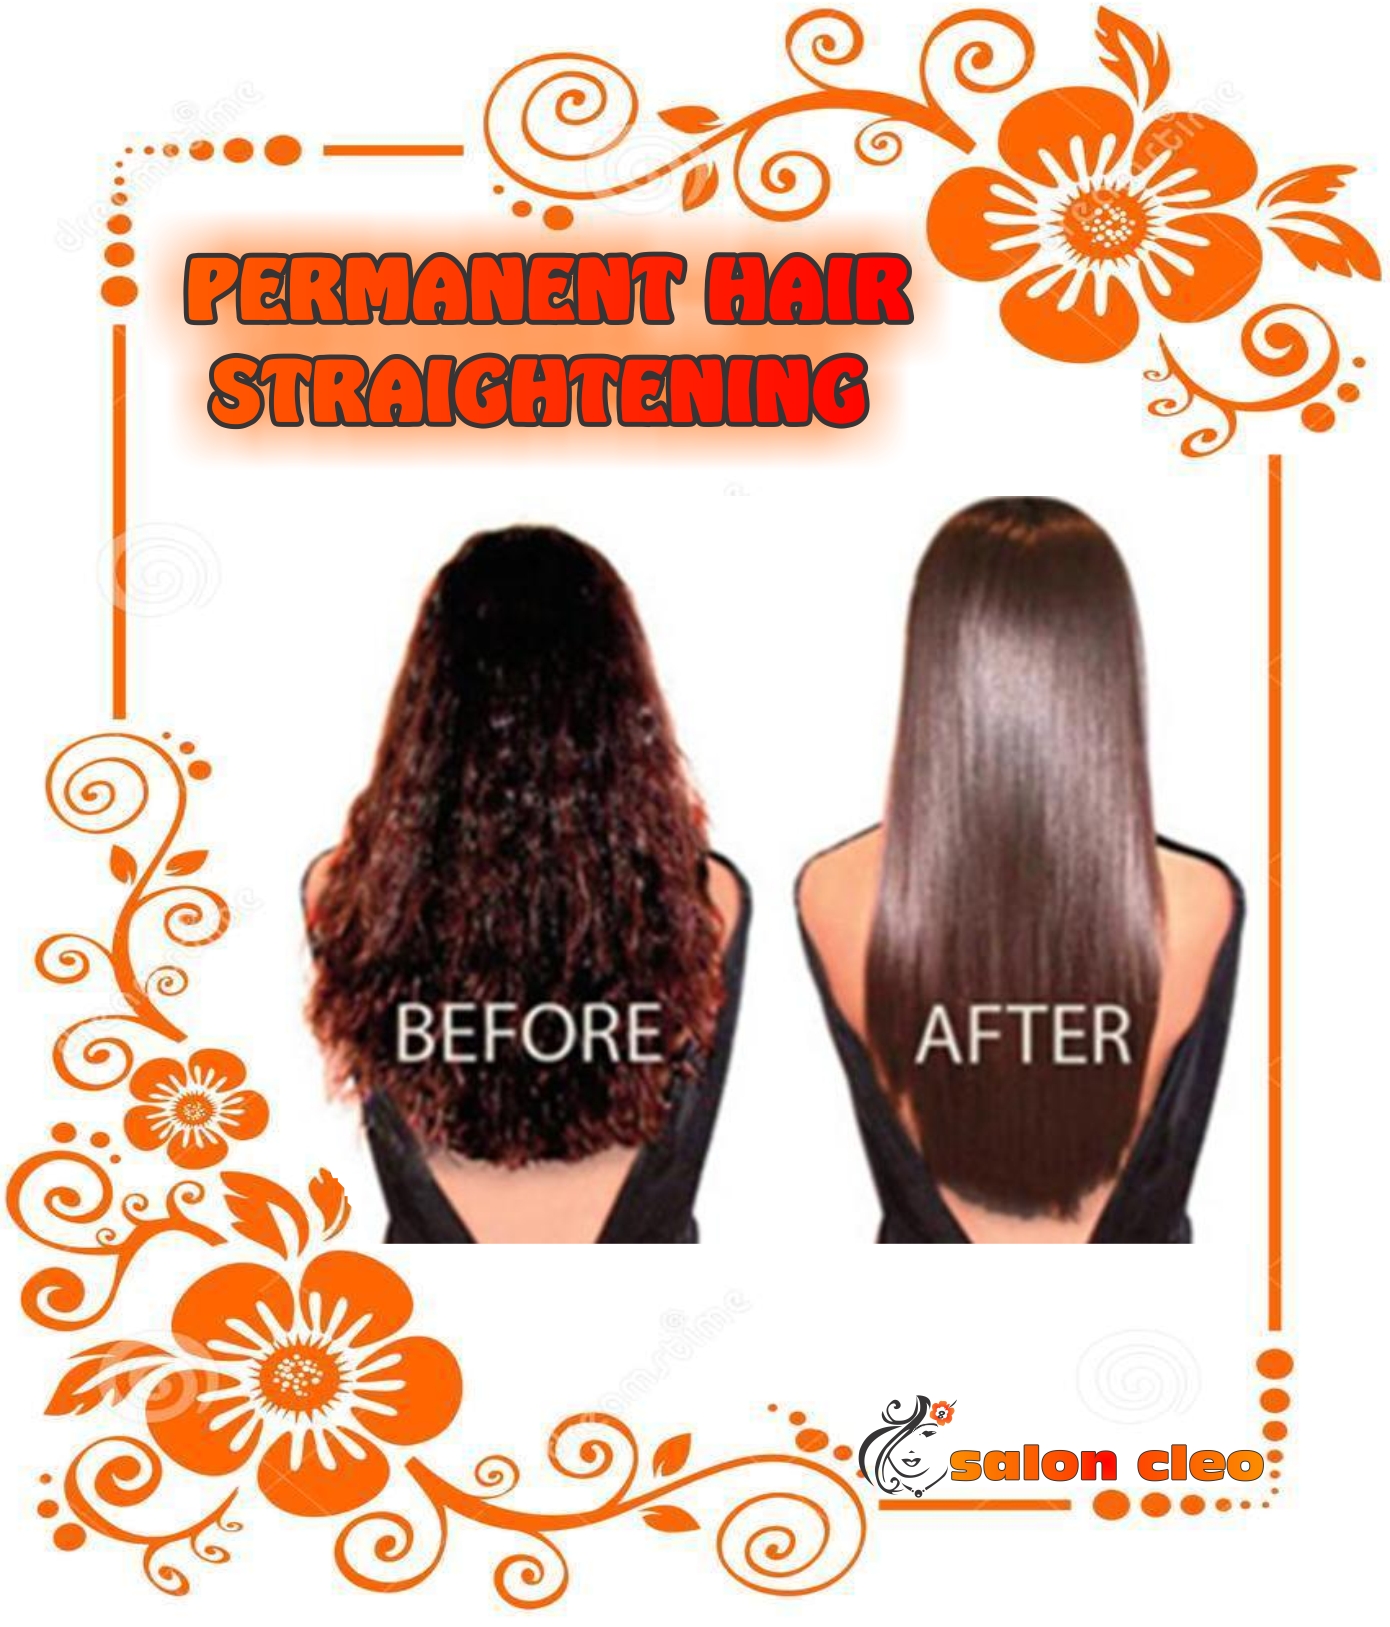 STOCKISTS OF GENUINE & ORIGINAL HAIR IRONS AT SALON CLEO PERMANENT HAIR STRAIGHTENING TREATMENT DONE AT SALON CLEO DURBAN WITH GUARANTEED RESULTS. FREE PRODUCTS FOR TREATMENT AND AFTER CARE OF YOUR HAIR STRAIGHTENING TREATMENT. WE HAVE THE CHEAPEST DEAL IN KZN FOR ALL CURLY UNMANAGEABLE HAIR at SALON CLEO 0315002353 cloud 9 hair irons, ghd hair irons, coriolliss hair iron straighteners , BHE Hair iron Stylers...for the cheapest deal in all hair irons in South Africa Durban @ salon cleo 0315002353 durban phoenix 0315009998BHE Styler Hair iron launched 2015 in South Africa. Beautiful Hair Everyday all us today for a quote on your bridal package to suit your special day. call Nivi 0736100316 for all bridal packages. SALON CLEO bridal wedding packages KRYOLAN, PROFESSIONAL MAKE-UP. FOR A FLAWLESS SENSUOUS DELIIOUS GLOWING LOOK WITH A TOUCH OF EXTRAVAGANCE. KRYOLAN HAS 750 COLOR-INTENSE SHADES IS LOVED BY PROFESSIONAL MAKE-UP ARTISTS WORLDWIDE. FOUNDATIONS AND MAKE-UPS FOR THE CHEAPEST DEAL IN KRYOLAN COSMETIC PRODUCTS AT SALON CLEO PHOENIX 0315002353 ACRYLIC NAILS Finger nails are an important part of overall appearance to many women You lead a busy life , you deserve a little pampering Royal treatment , reasonable prices . its all yours at salon cleo ACRYLIC NAILS Finger nails are an important part of overall appearance to many women You lead a busy life , you deserve a little pampering Royal treatment , reasonable prices . its all yours at salon cleo Professional Hair stylist Nivi Deenanath SALON CLEO. Family business established for 30 years. with an enormous clientelle. We are a team of hair designers with the skills, the tools and the experience to create beautiful styles. We have spent years perfecting our craft so we can work together as a team to make you feel beautiful and confident and give you an amazing experience in our salon mage and personal facial looks is everything today. We at SALON CLEO give off 100% in making you look your very best with use of the correct facial products at the cheapest affordable rates. facials, waxing, threading, chemical peel facials, dermaplex facial products, justine facial products,kryolan facial costmetics products. salon cleo phoenix 0315002353 0315009998 GARCINIA CAMBOGIA WONDER WEIGHT LOSS CAPSULES now available. COOL LIPOLYSIS FAT FREEZING WEIGHT LOSS TREATEMENT PROCEDURE done at salon cleo. FAT BURNER WEIGHT LOSS CAPSULE ALSO AVAILABLE AT SALON CLEO DURBAN. FERRADIC HEAT WEIGHT LOSS PADS & ELECTRO MAGNETIC TONING WEIGHT LOSS PADS...These procedures now available at salon cleo . call NIVI 0736100316 today for a quick fix to you weight loss resolutions  SALON CLEO FOR THE CHEAPEST GHD HAIR IRON IN DURBAN SALON CLEO HAS THE CHEAPEST DEAL IN CLOUD NINE HAIR IRON IN DURBAN SALON CLEO ONLY KEEPS GENUINE HAIR IRON STRAIGHTENERS SALON CLEO FOR THE CHEAPEST PRICE ON CARAOLIS HAIR IRONSSALON CLEO FOR THE CHEAPEST PRICE DEAL ON ALL CORIOLIS HAIR IRONS GHD GHD GHD GHD SALES GHD CHEAPEST GHD CHEAPEST GHD HAIR IRONS SALON CLEO SALON CLEO GHD SALON CLEO CLOUD 9 SALON CLEO CLOUD NINE SALON CLEO CARAOLIS HAIR IRON SALON CLEO CORIOLIS HAIR IRONS GHD HAIR IRON REPAIRS CLOUD NINE HAIR IRON REPAIRS DURBAN CORIOLIS HAIR IRON REPAIRS DURBAN RCS CREDIT CARDS ACCEPTED HERE AT OUR STORE FOR PURCHASE OF YOUR CORIOLLIS HAIR IRON.RCS PURCHASES GHD HAIRS IRONS RCS PURCHASES CLOUD 9 HAIR IRONS RCS PURCHASES CLOUD NINE HAIR IRON APPLICATIONS NOW DONE INSTORE FOR AN RCS CREDIT CARD & FEEDBACK WITH 48 HOURS.COROILIS HAIR IRON REPAIRS DURBAN HAIR IRON REPAIR CENTRE DURBAN GHD REPAIRS DURBAN GHD HAIR IRON REPAIRS PROFFESSIONALLY DONE IN DURBAN PHOENIX  CHEAPEST PRICE ON ALL HAIR IRONS GHD CLOUD 9 CLOUD NINE CARIOLIS CORIOLIS GHD HAIR IRONS DURBAN SALON CLEO PHOENIX Salon Cleo is the cheapest Stockists  of GHD HAIR IRONS, CLOUD 9 HAIR IRONS, CARIOLIS HAIR IRON GHD NEW RANGE HAIR IRONS:GHD ECLIPSE NOW AVAILABLE AT SALON CLEO PHOENIX DURBAN 0315009998 CLOUD NINE MENS MINI STYLERS...CLOUD 9 THE TOUCH HAIR IRON...NEW RANGE OF THE CLOUD NINE SERIES.CLOUD 9 ON AN EXTREMLY LOW SPECIAL AT R1750 (CASH ONLY) ONLY AT SALON CLEO KZN DURBAN 0315002353....0315009998SALON CLEO HAS THE  CHEAPEST DEAL ON CLOUD NINE HAIR IRON STRAIGHTENERS in Durban Kzn.Salon Cleo is the cheapest Stockists of GHD HAIR IRONS, CLOUD 9 HAIR IRONS, CORIOLLIS HAIR IRONCLOUD 9 MENS MINI STYLERS...CLOUD NINE THE TOUCH HAIR IRON....CLOUD 9  BHE HAIR IRON STYLERSBeautiful Hair Everyday  The unique BHE Styler protects your hair while you style, thanks to its SMART plates that help to keep your hair healthy and strong.  The BHE Styler SMART plates include: Kera Therapy protein infused plates assists in smoothing the cuticles and heal the hair, in time of split ends and damaged hair Keratin is a naturally occurring protein, which is a vital element in strong, healthy hair. Next generation ceramic plates are infused with Keratin proteins that transfer to your hair during styling and last the life of the product, 